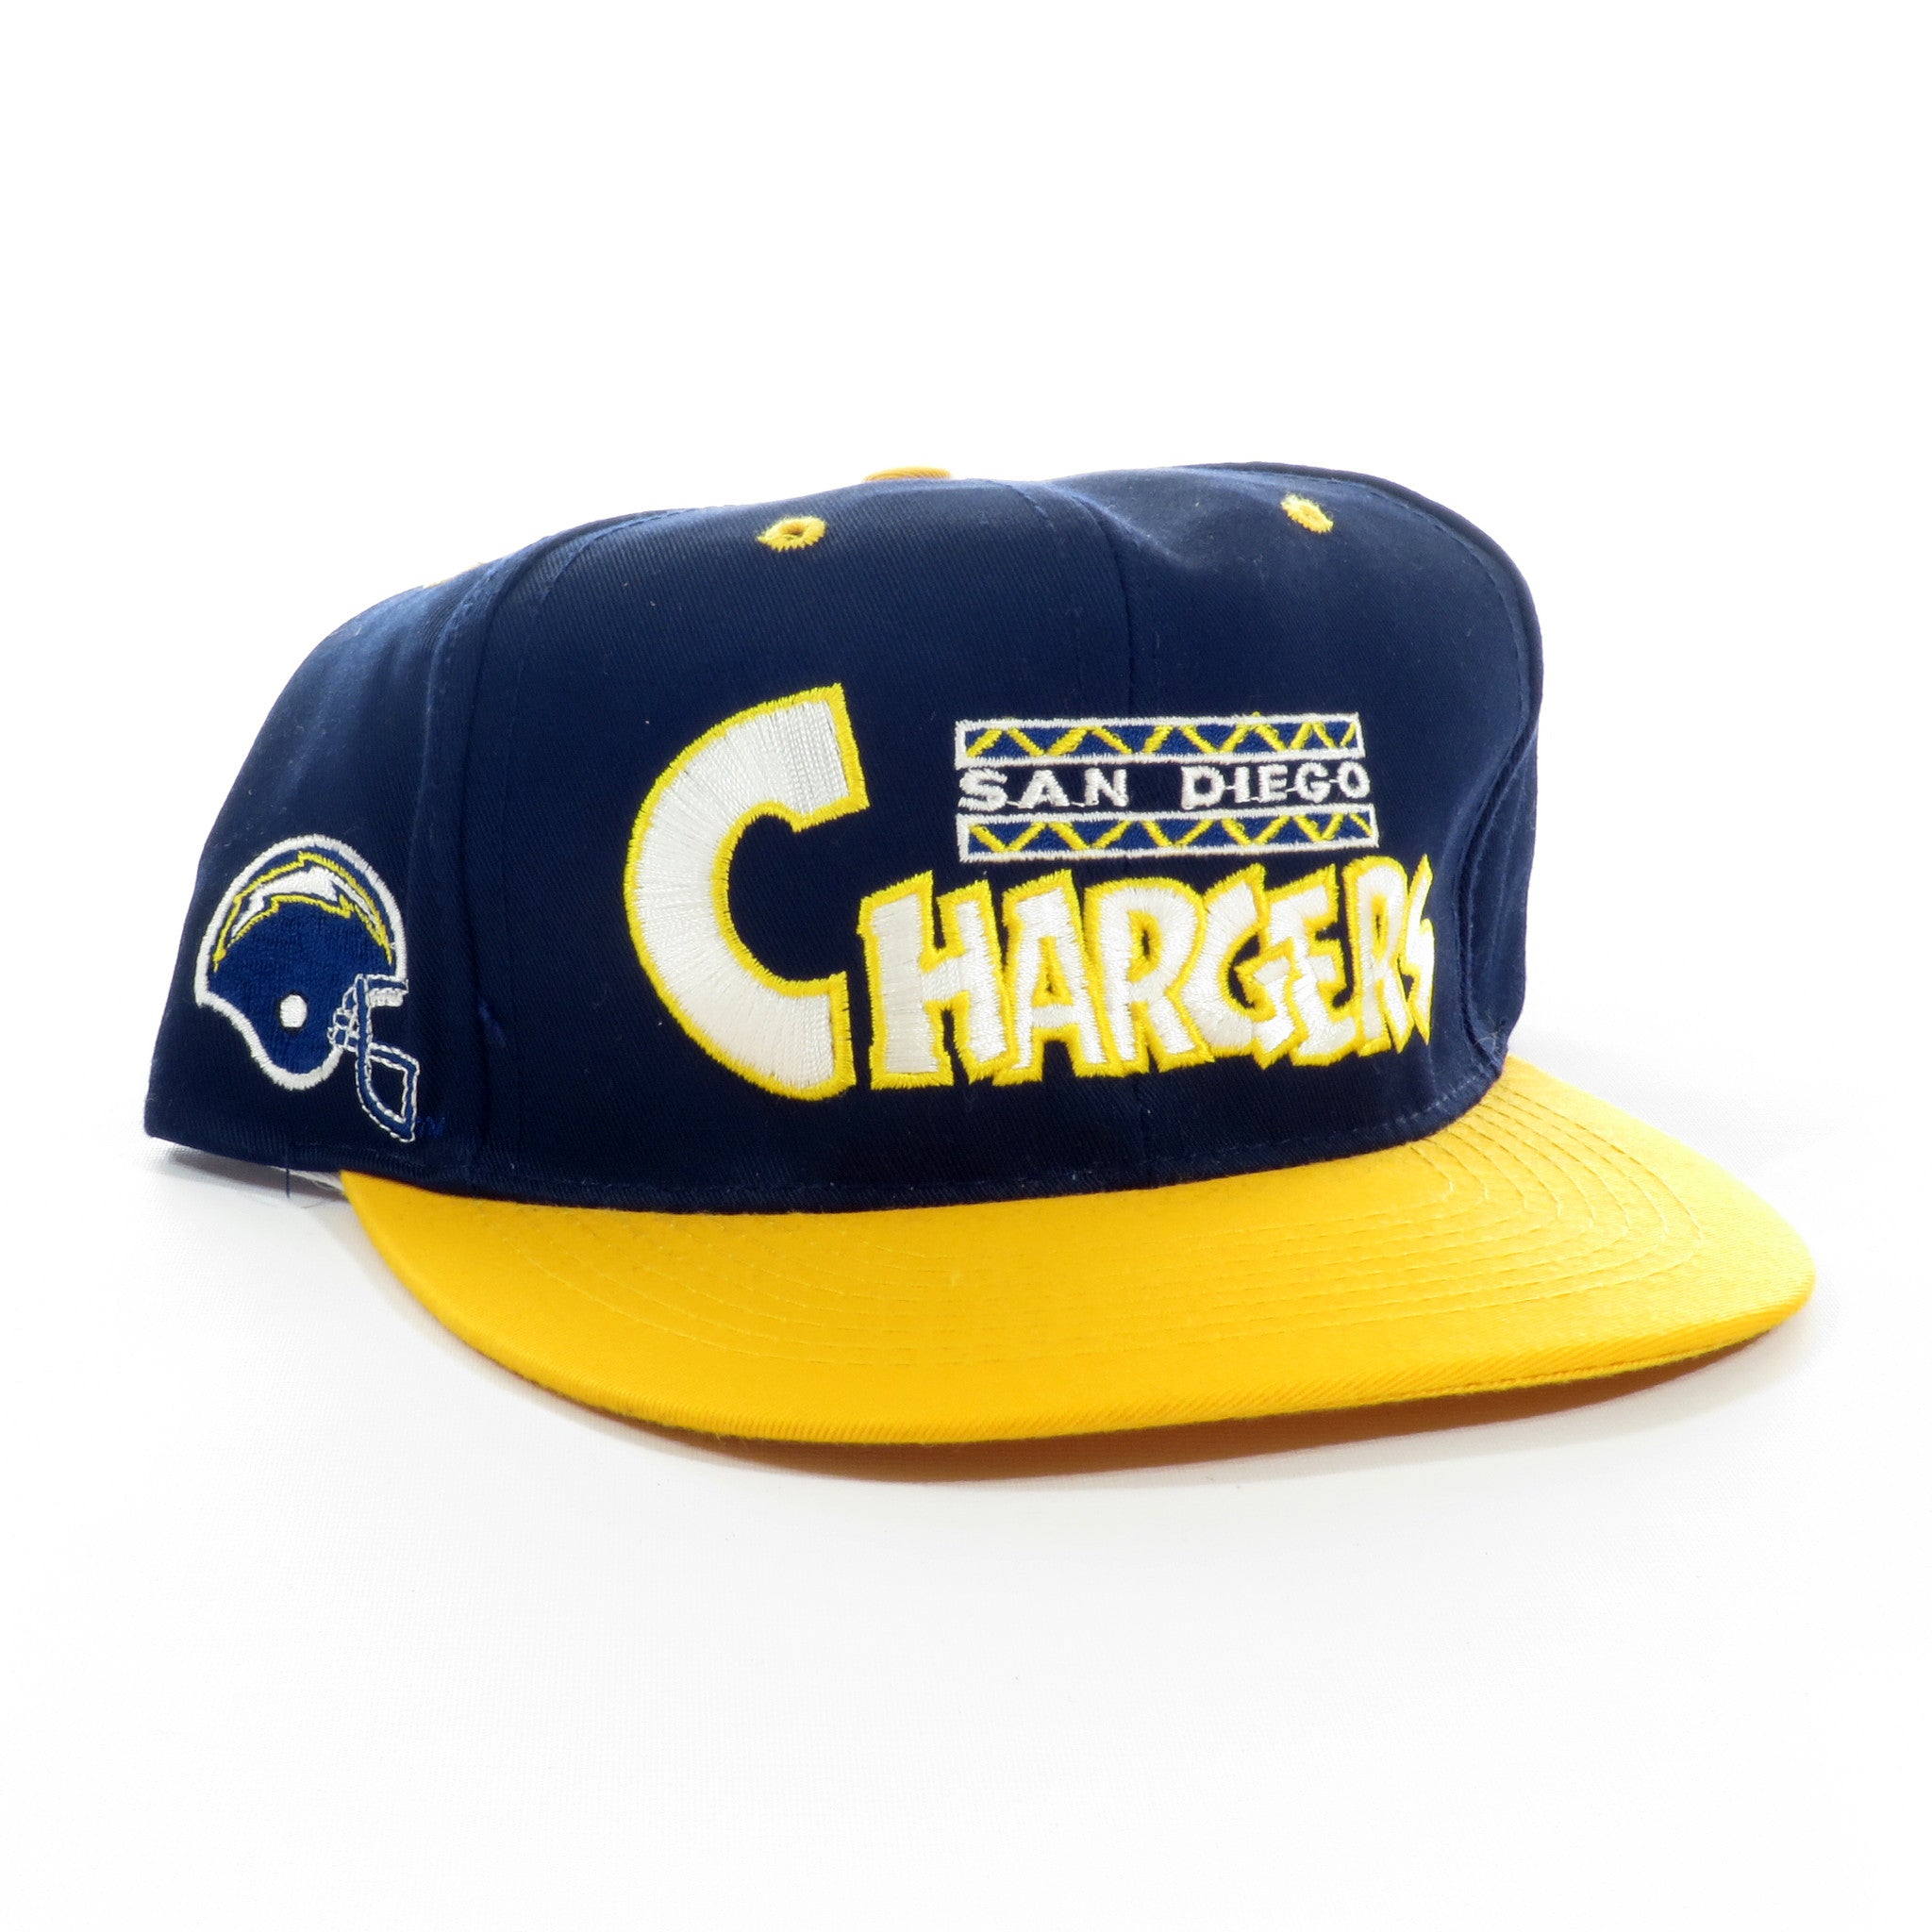 San Diego Chargers Snapback Hat